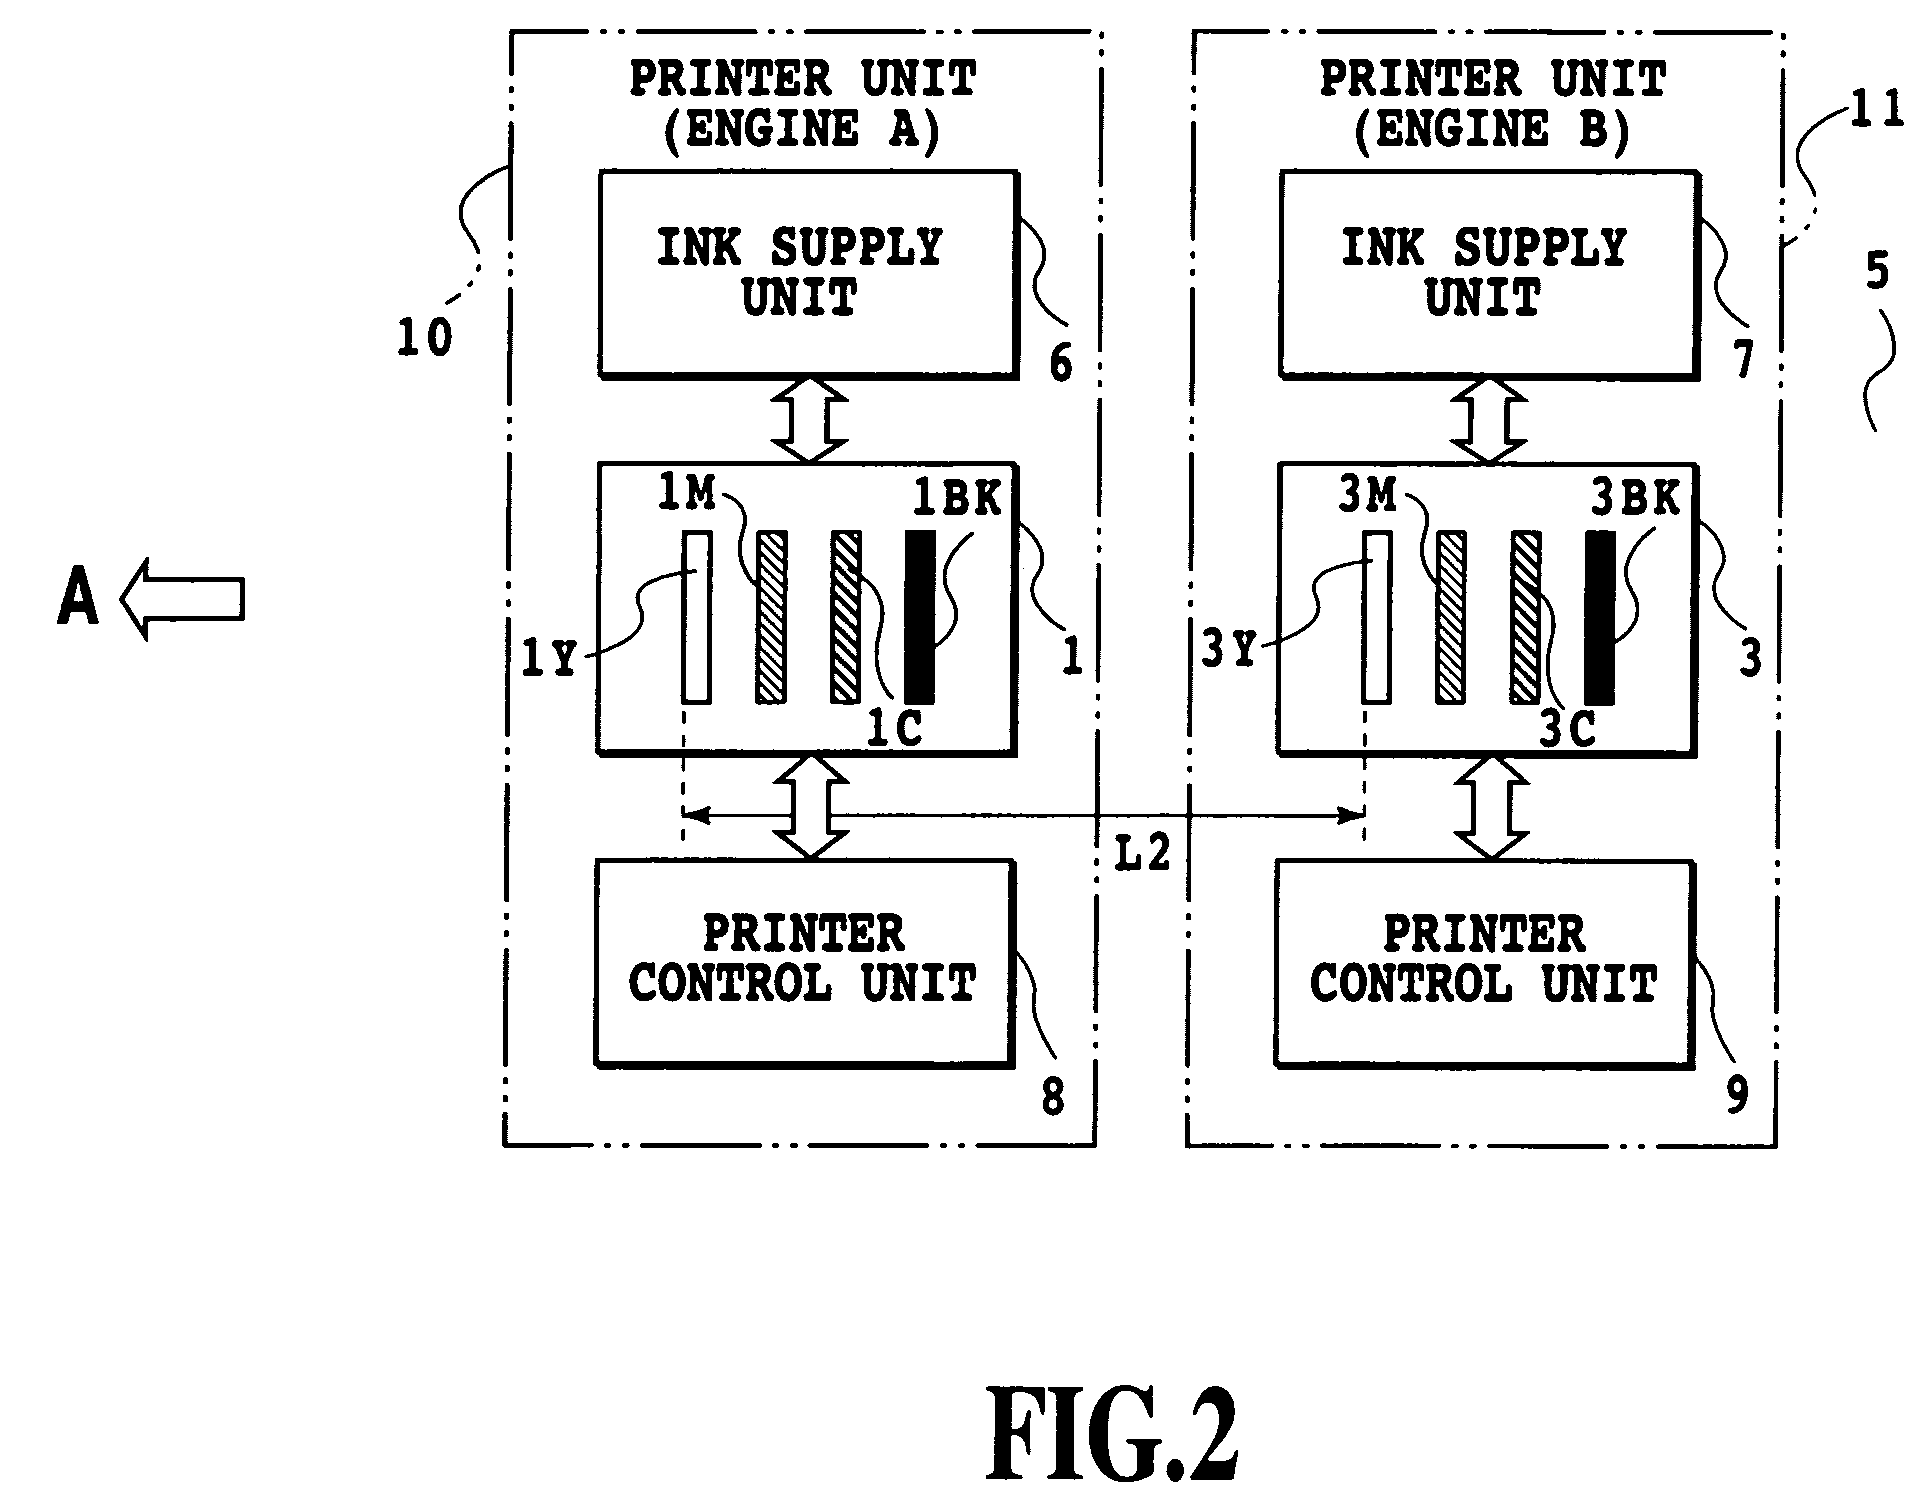 Printing apparatus, method, and program comprising a plurality of printer units using synchronized, divided print data